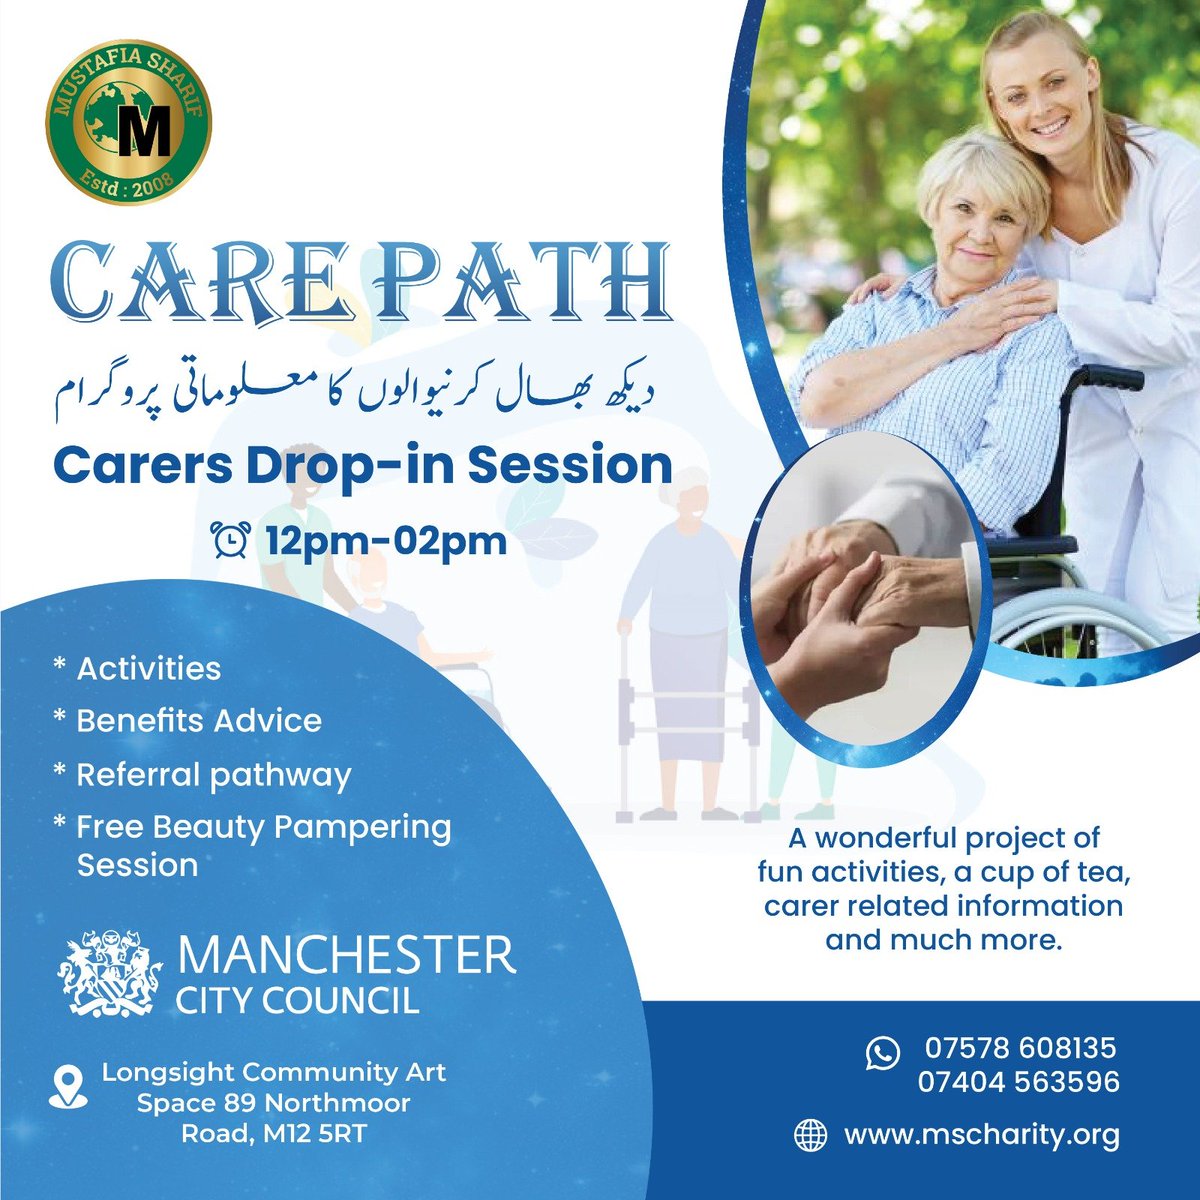 Calling all carers! Take a break & join us every Monday, 12-2pm @ Longsight Community Art Space (89 Northmoor Rd, M12 5RT) for Care Path. Share experiences, find support & grow your caregiving skills. Your well-being matters! #ManchesterCityCouncil @OMVCS